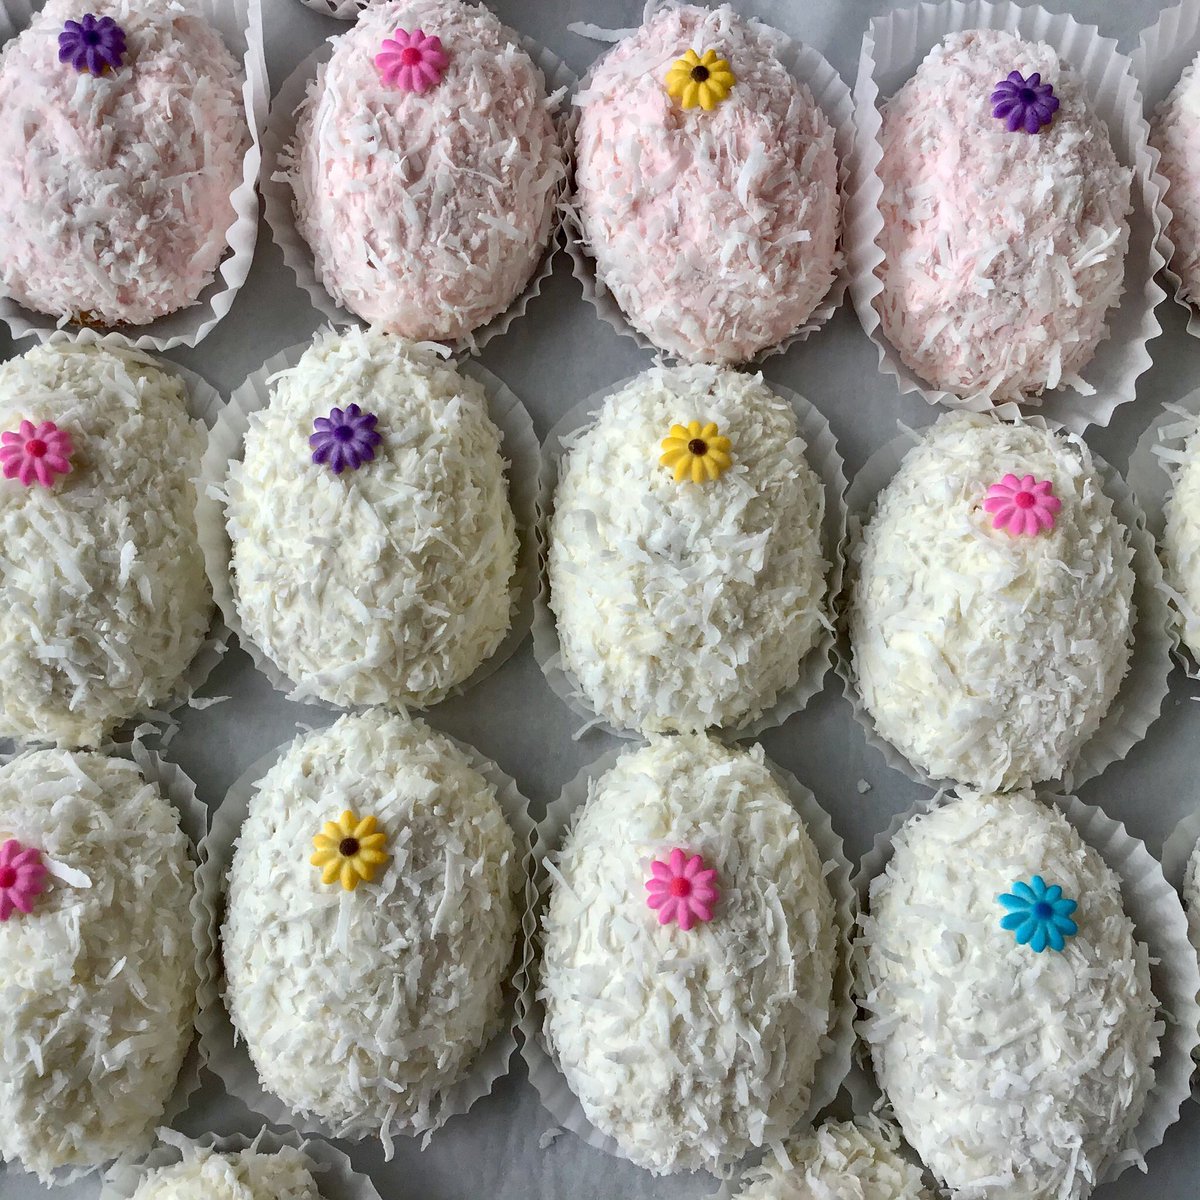 We know where the Easter eggs are hidden!🐰 
Hint: this week hunt for them in the pastry case it’s coconut cake with French buttercream rolled coconut flakes
#eastercake #eastereggcake #coconutcake #frenchbuttercream #easteregghunting #frenchpatisserie #cakeandpastry #lexingtonky